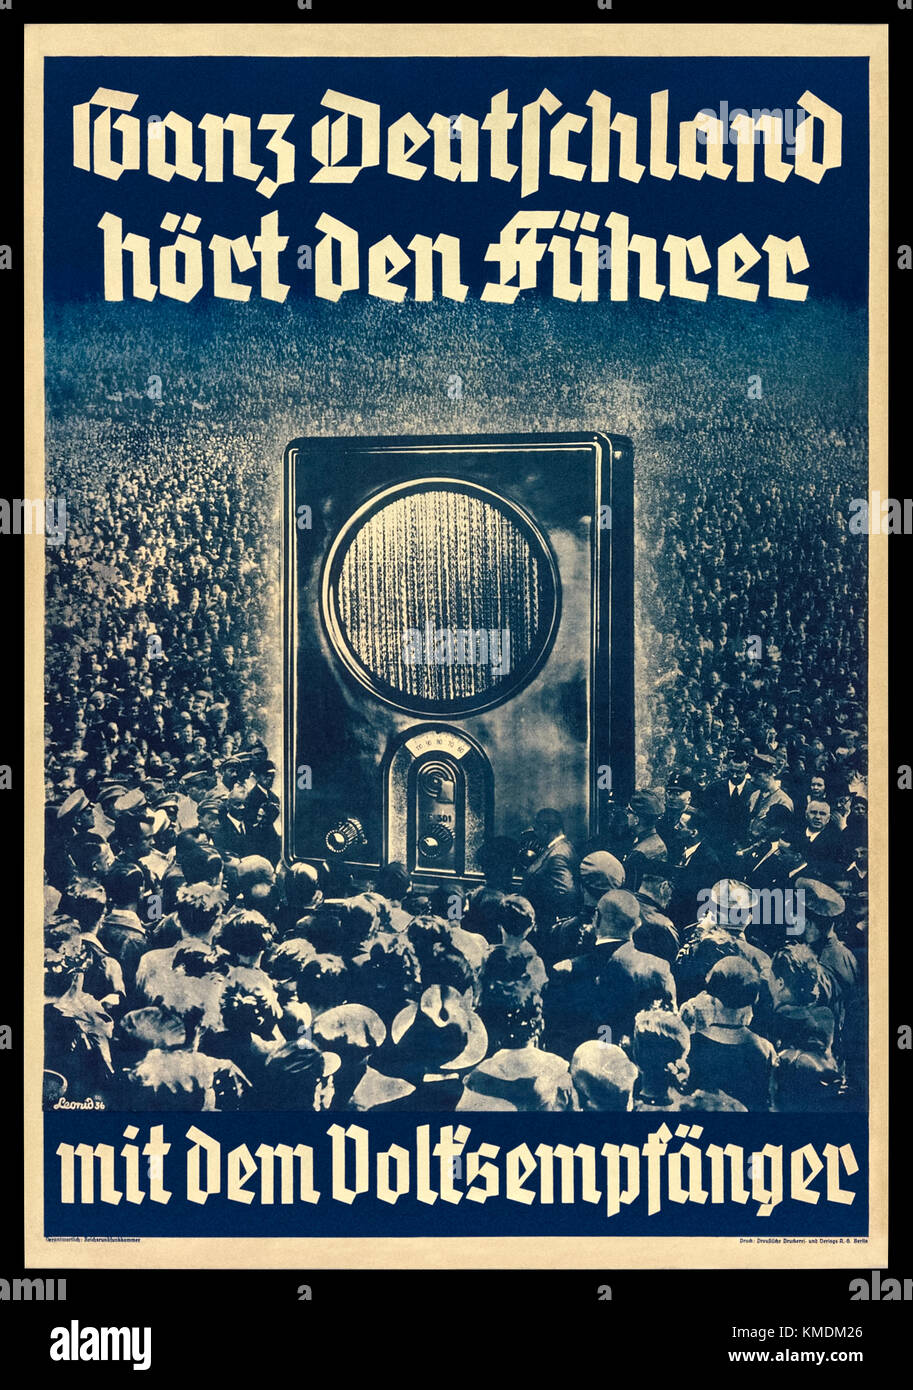 “Ganz Deutschland hört den Führer mit dem Volksempfänger” (All over Germany hear the leader with the people's receiver) 1936 Nazi Germany propaganda poster featuring a photograph of a crowd of Germans at a Nuremberg Rally surrounding an oversized Volksempfänger VE301 radio receiver which was developed on instruction by Propaganda Minister Joseph Goebbels and when on sale in 1933. See more information below. Stock Photo